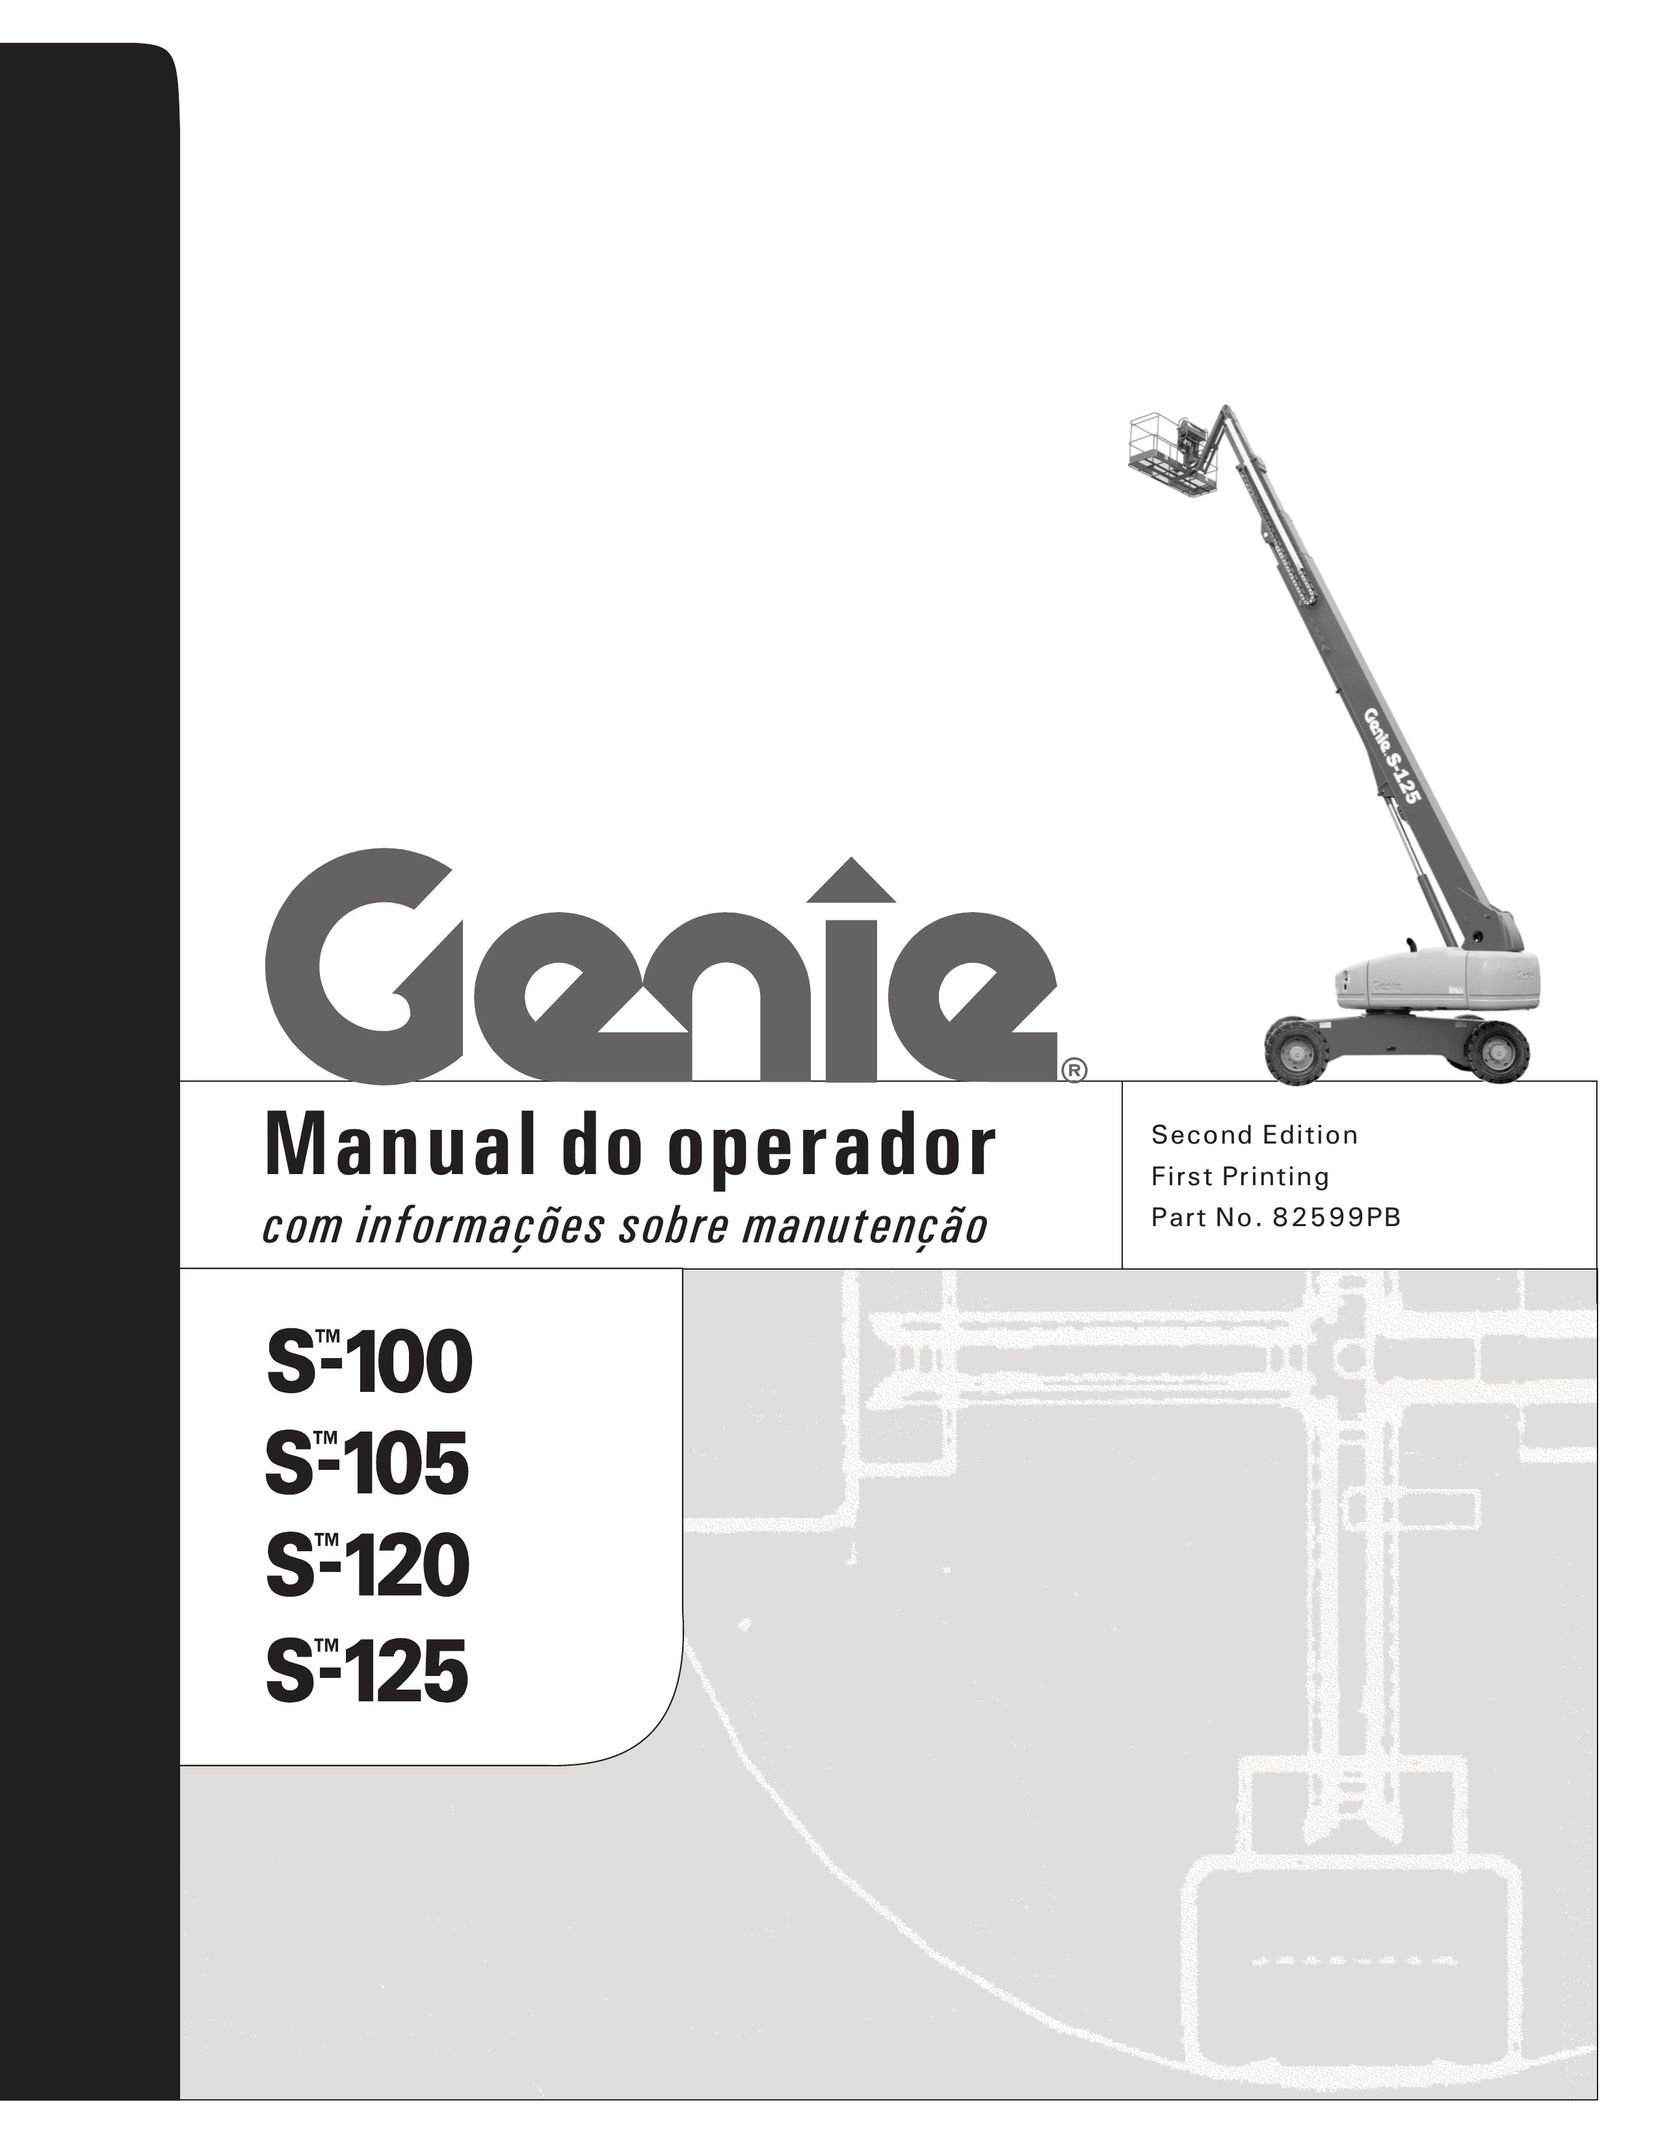 Genie S-105 Biscuit Joiner User Manual (Page 1)